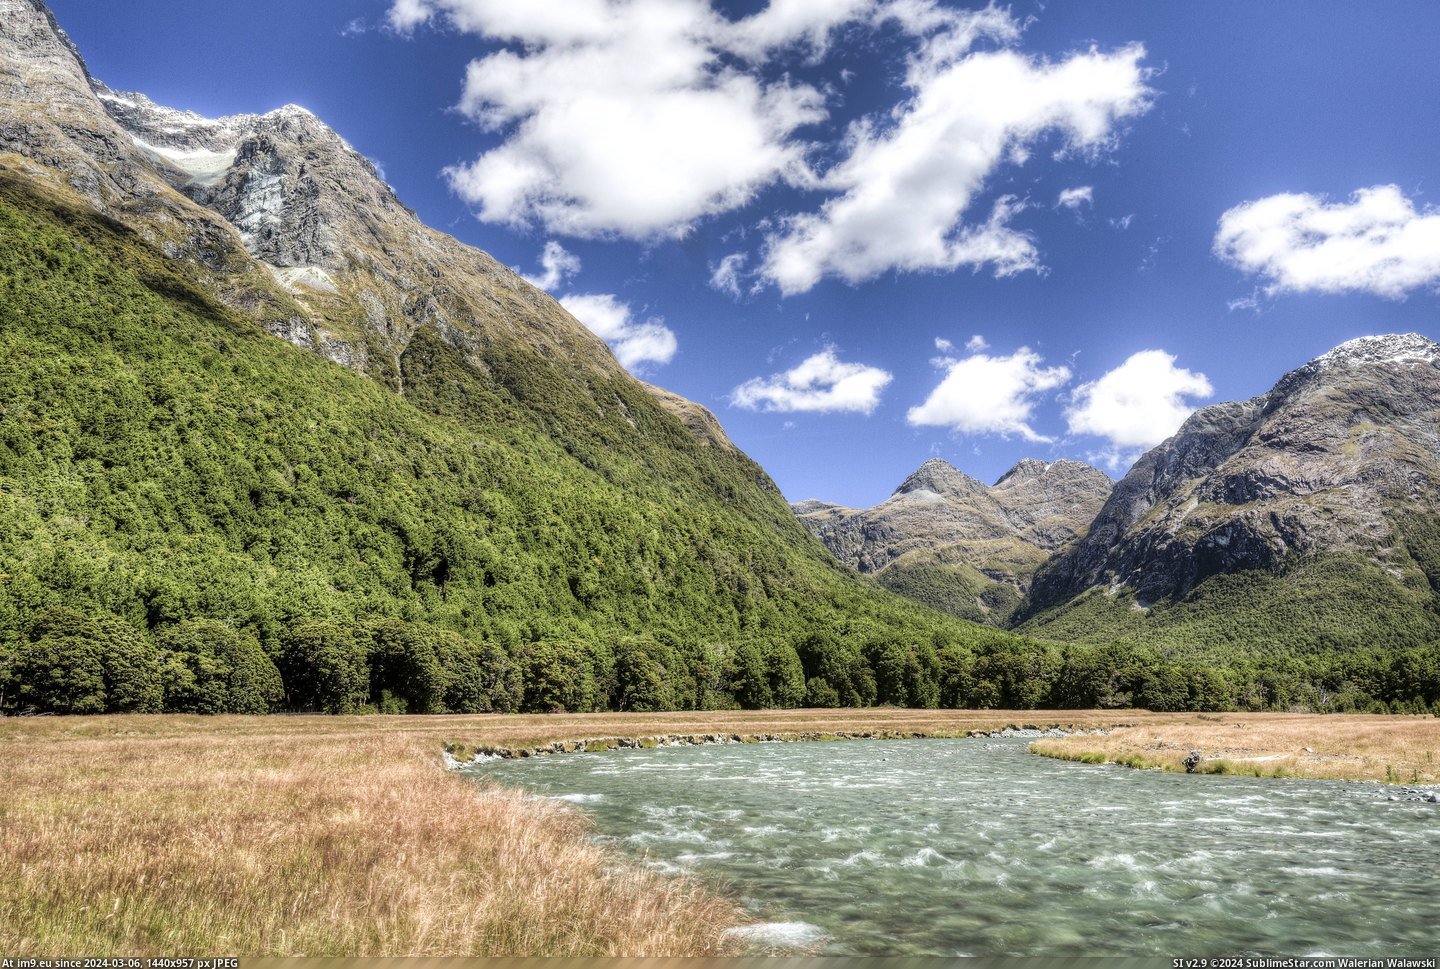 #One #Park #National #Mountains #Eye #Fiordland #Valley #River #Forest [Earthporn] River, Grassland, Forest, and Mountains of the Caples Valley, Fiordland National Park  [5558x3704] [One Lidless Eye] Pic. (Изображение из альбом My r/EARTHPORN favs))